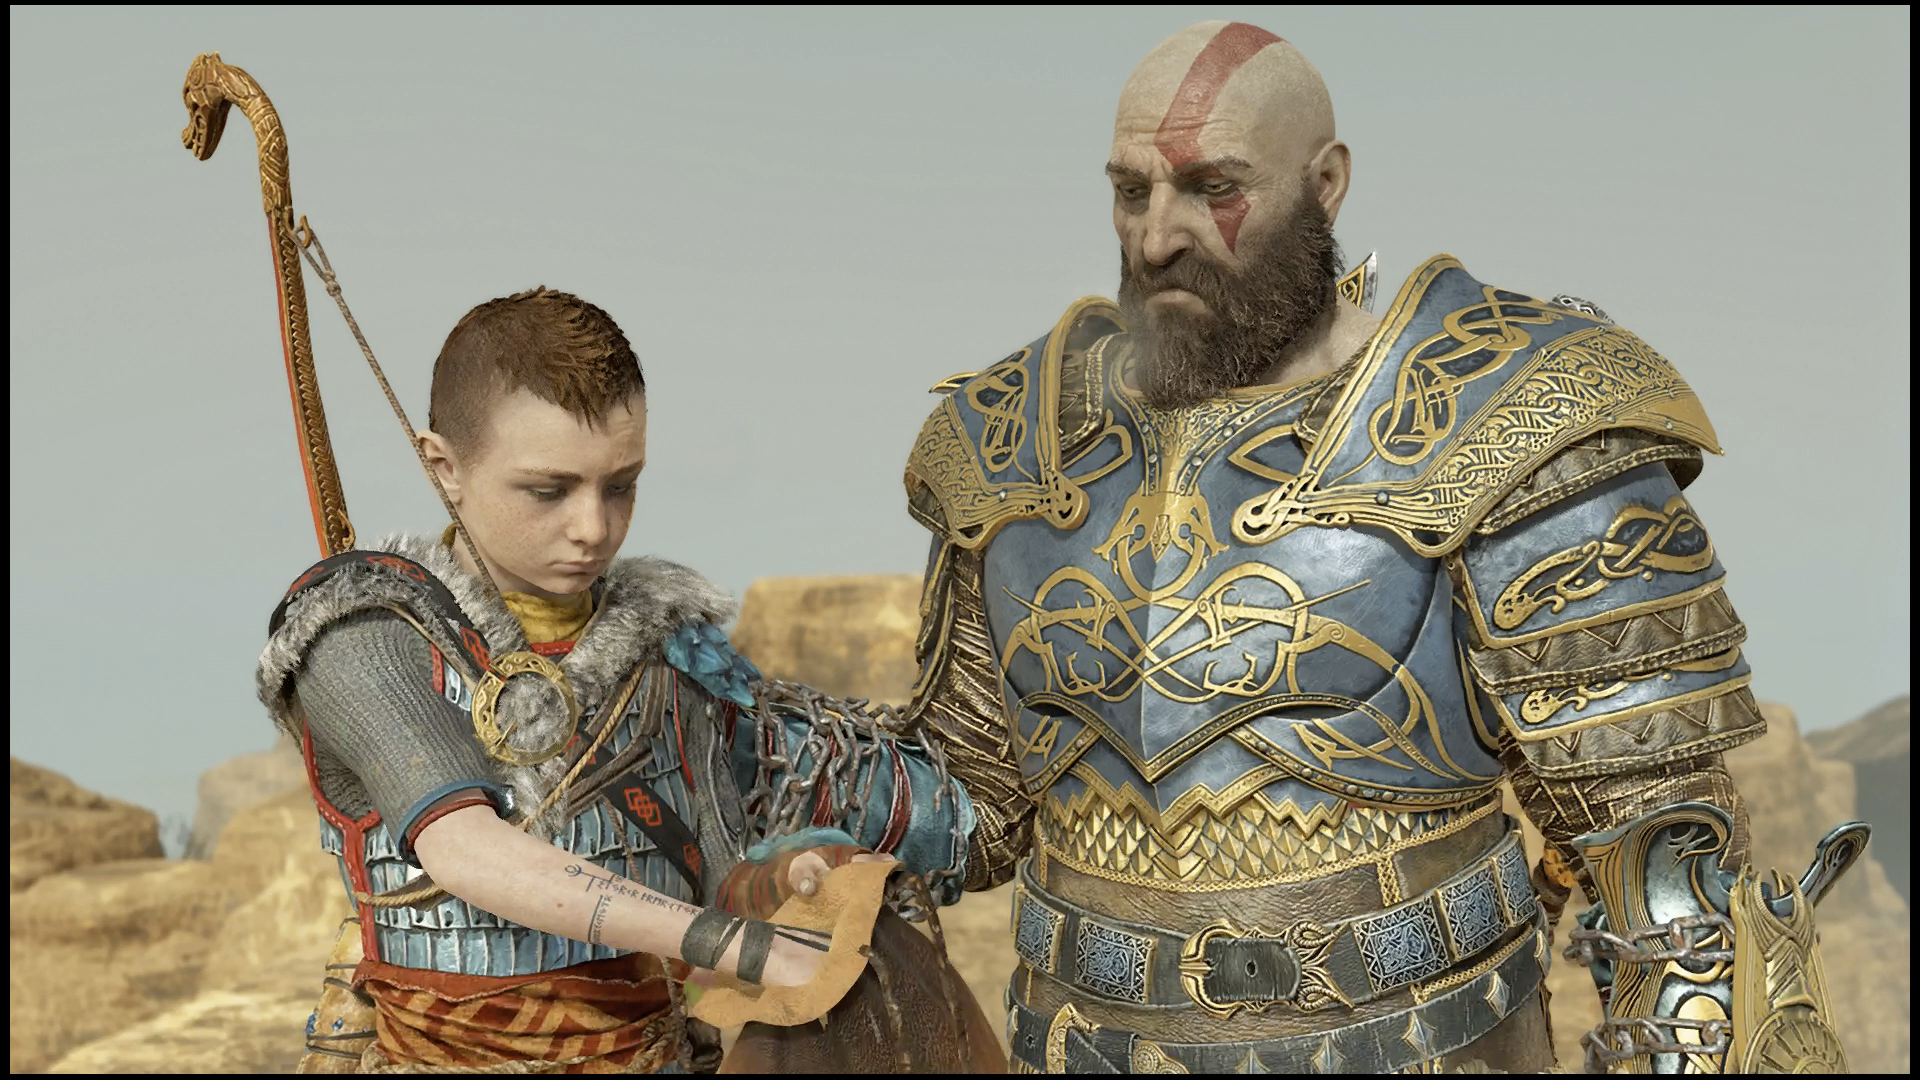 What’s Next For God Of War